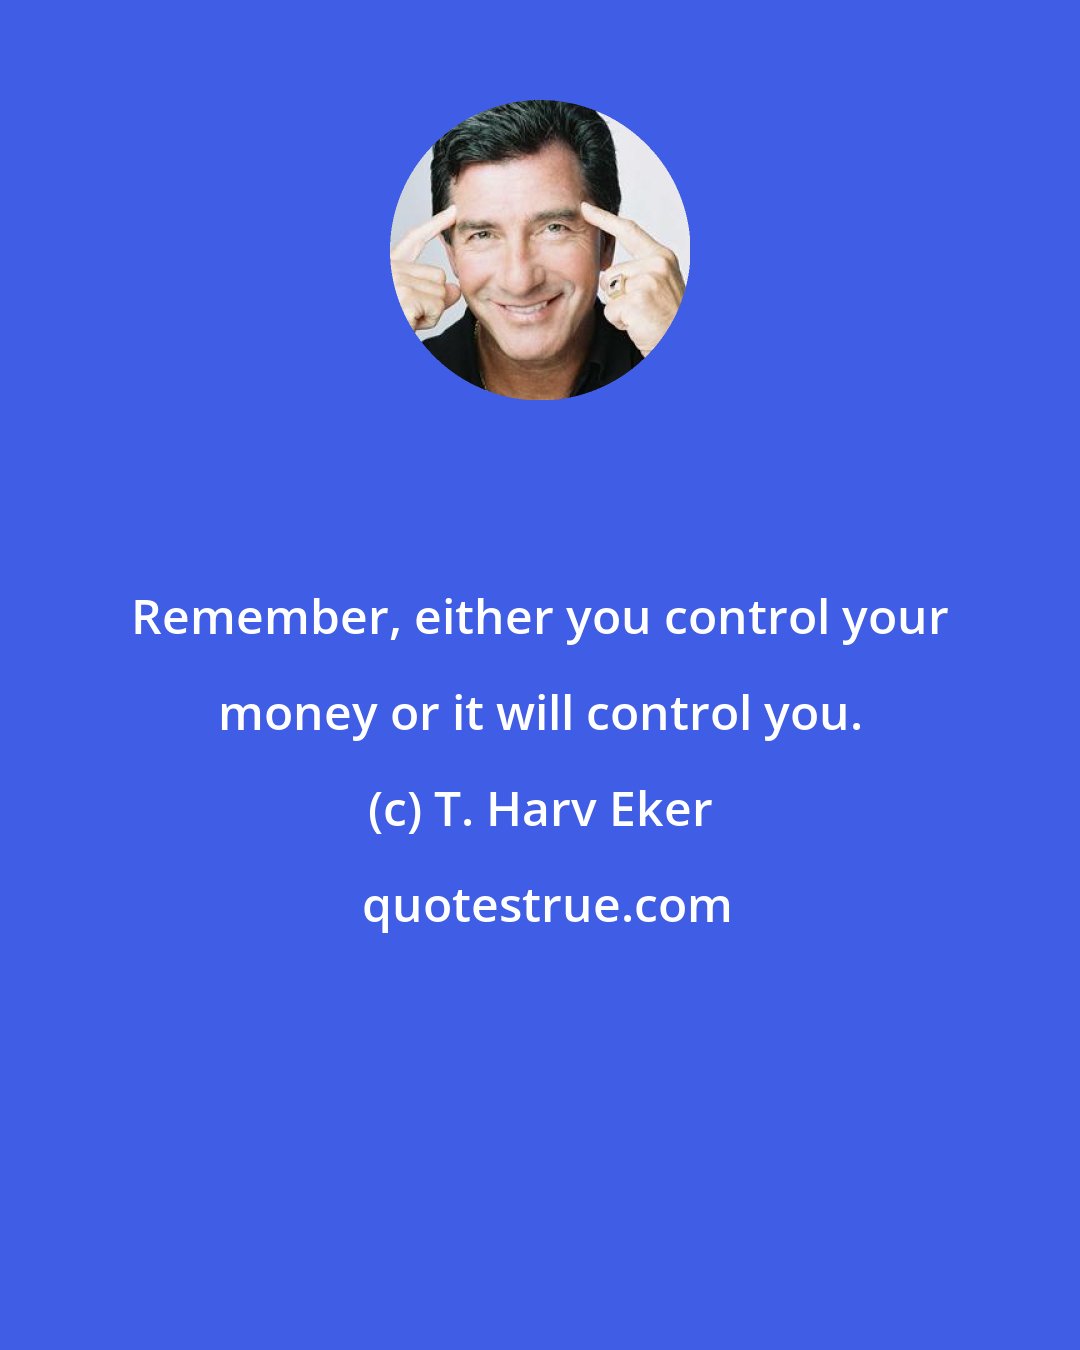 T. Harv Eker: Remember, either you control your money or it will control you.